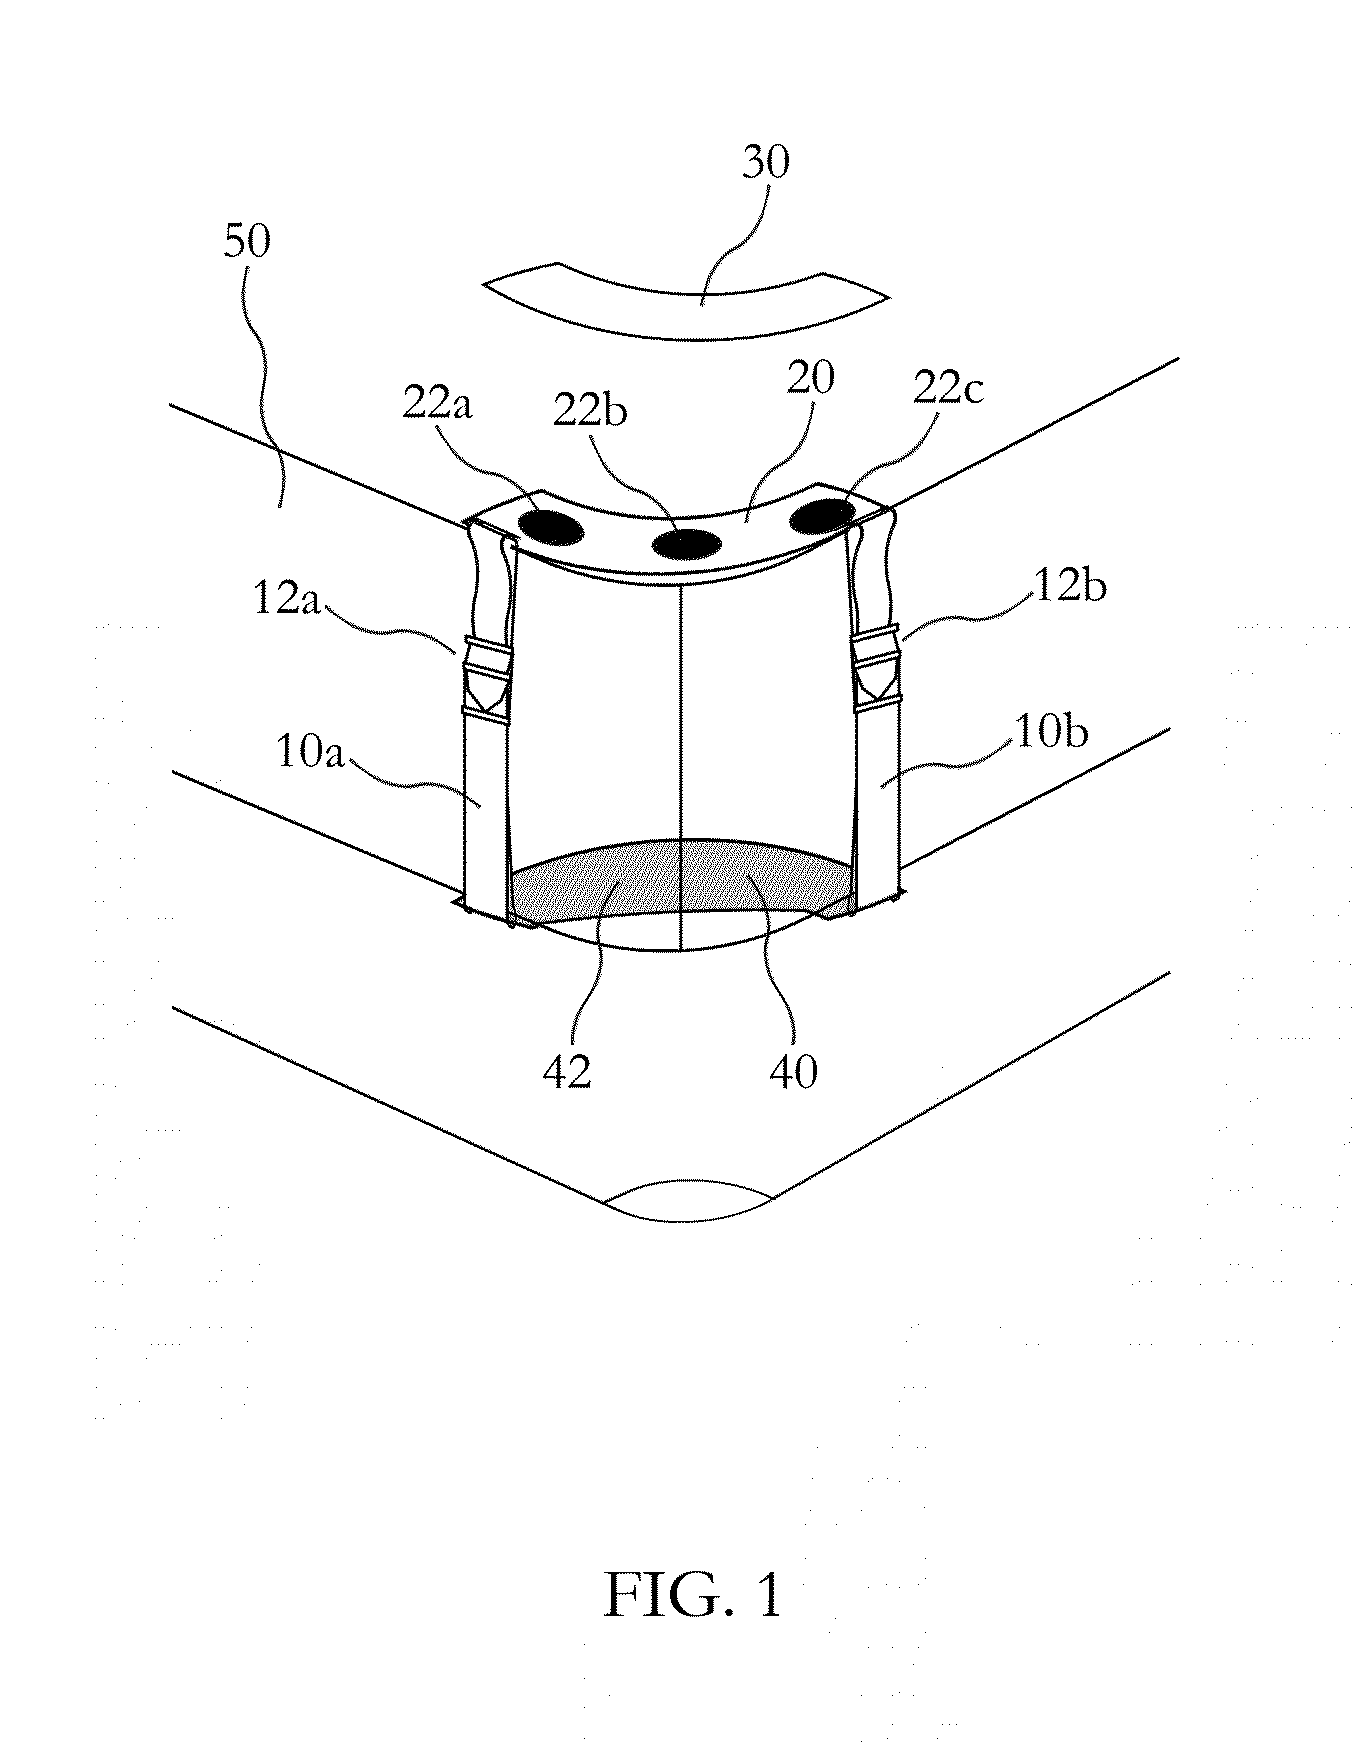 Device and method for securing a bed sheet